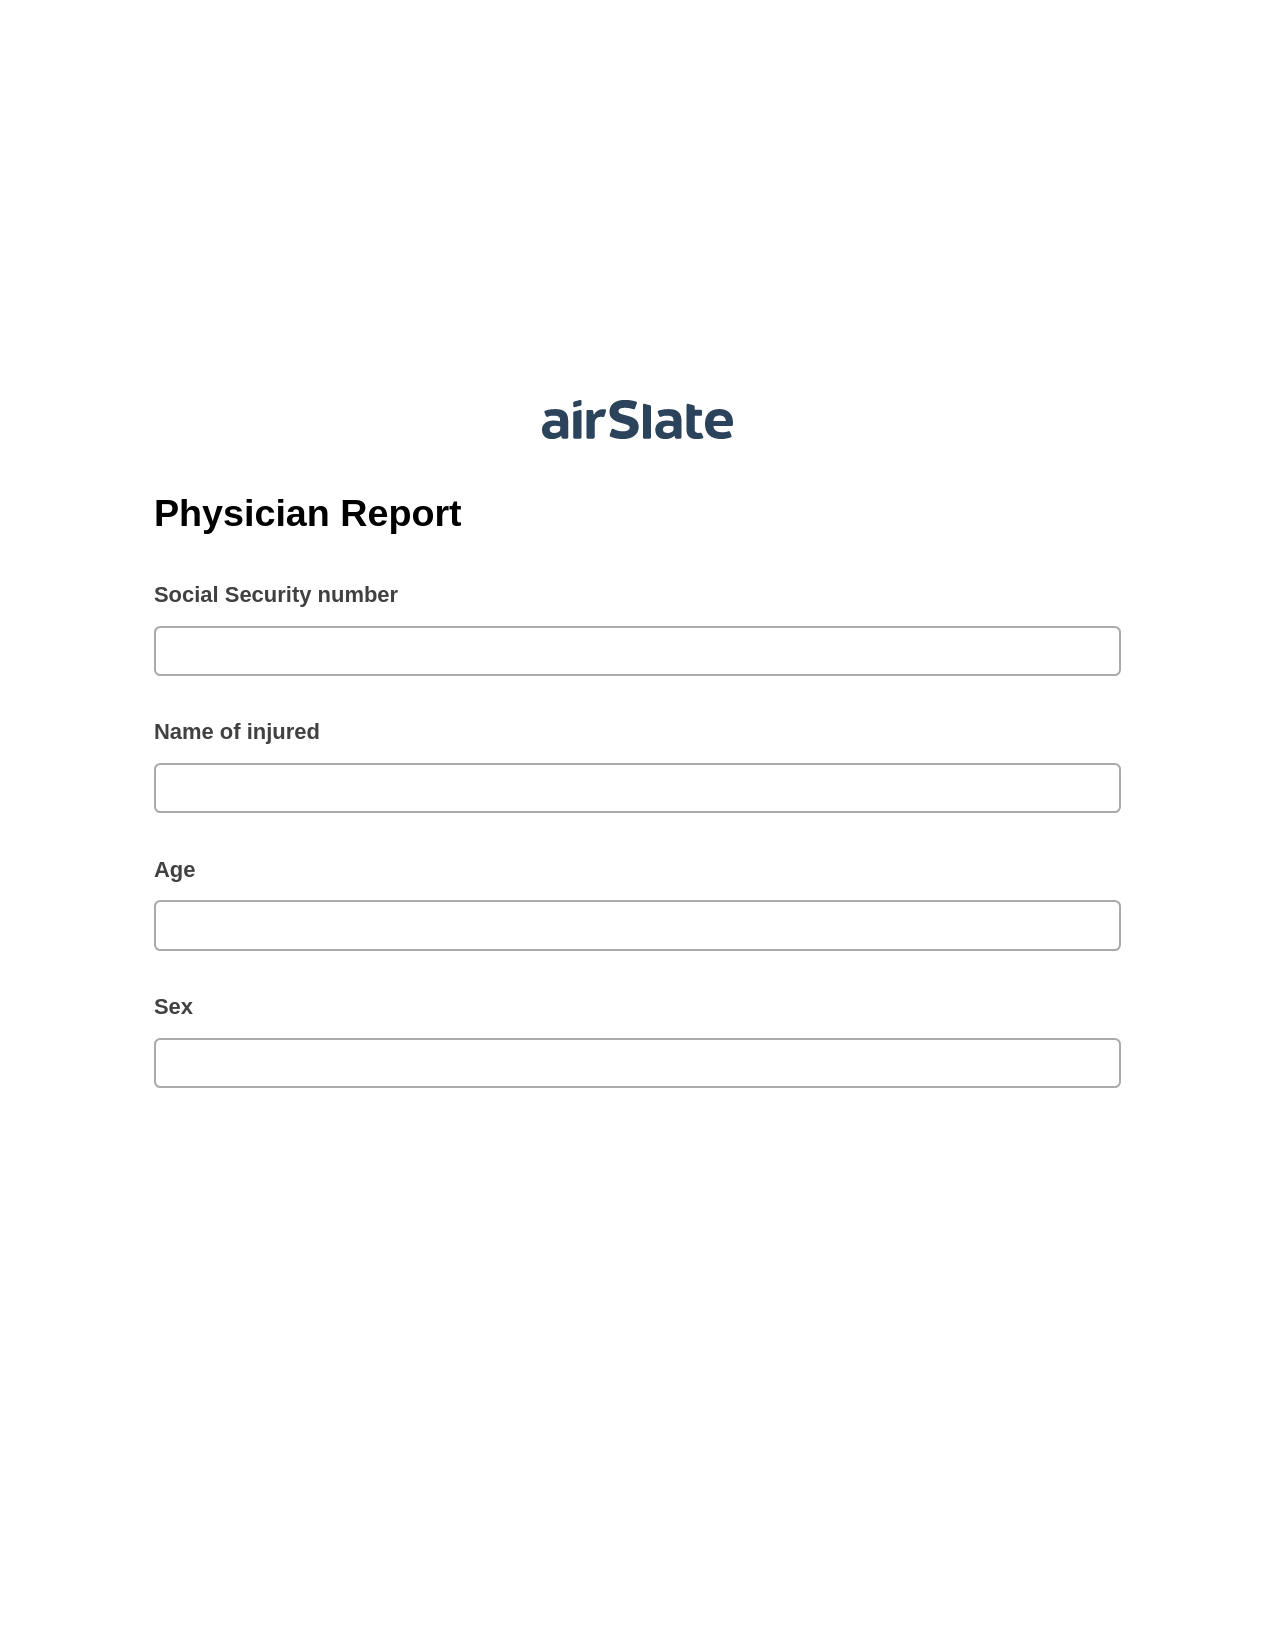 Physician Report Pre-fill from another Slate Bot, Update NetSuite Record Bot, Archive to OneDrive Bot